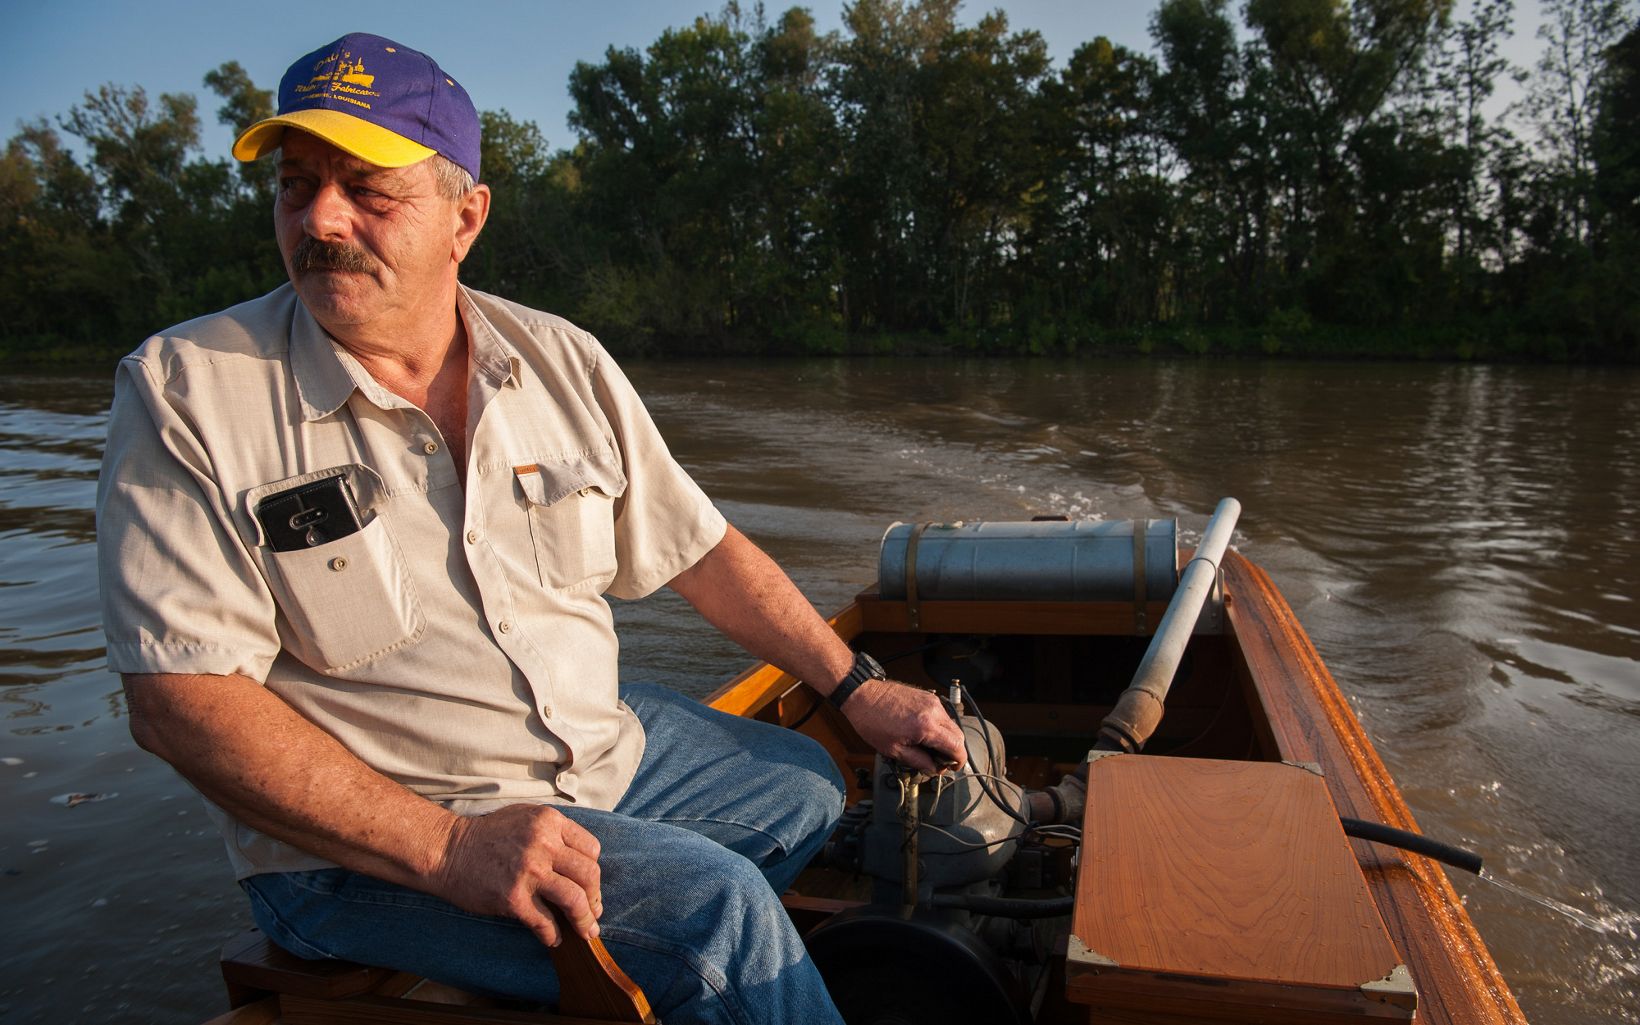 A man in a short-sleeved collared shirt and a baseball hat navigates his wooden boat through swampy water. 